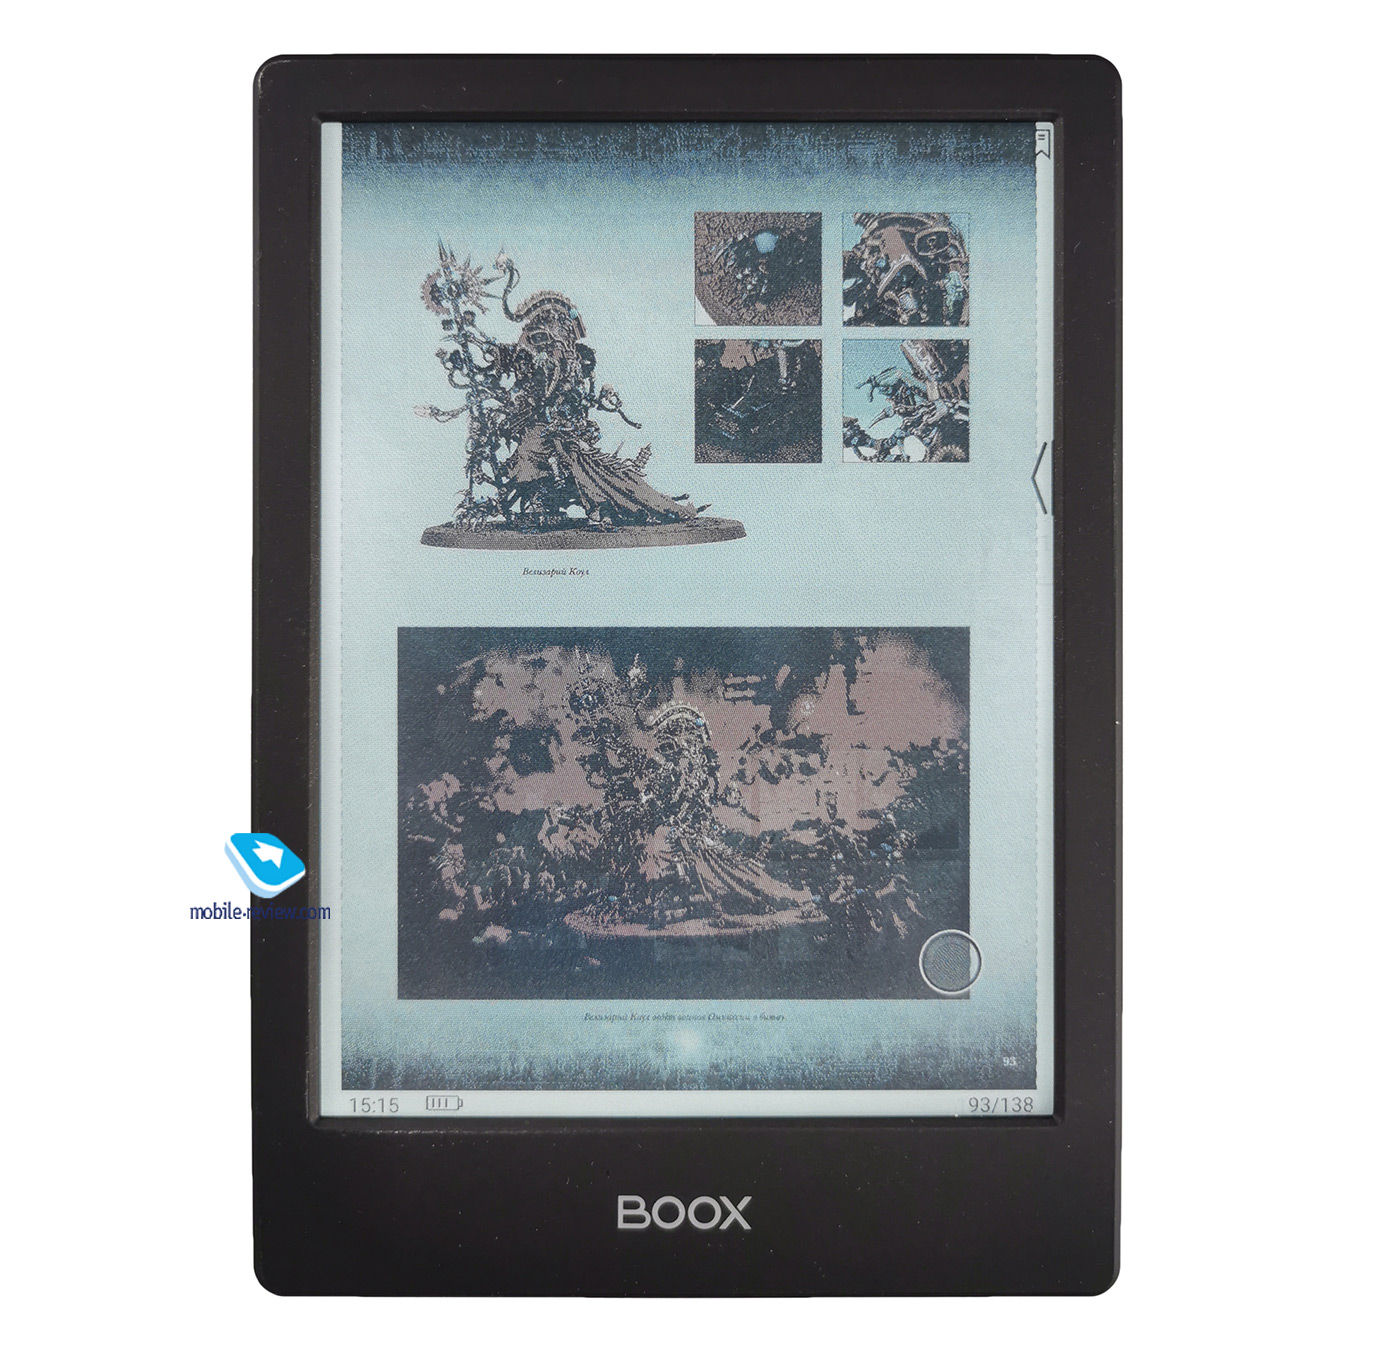 Review of the e-book ONYX BOOX Poke 2 Color